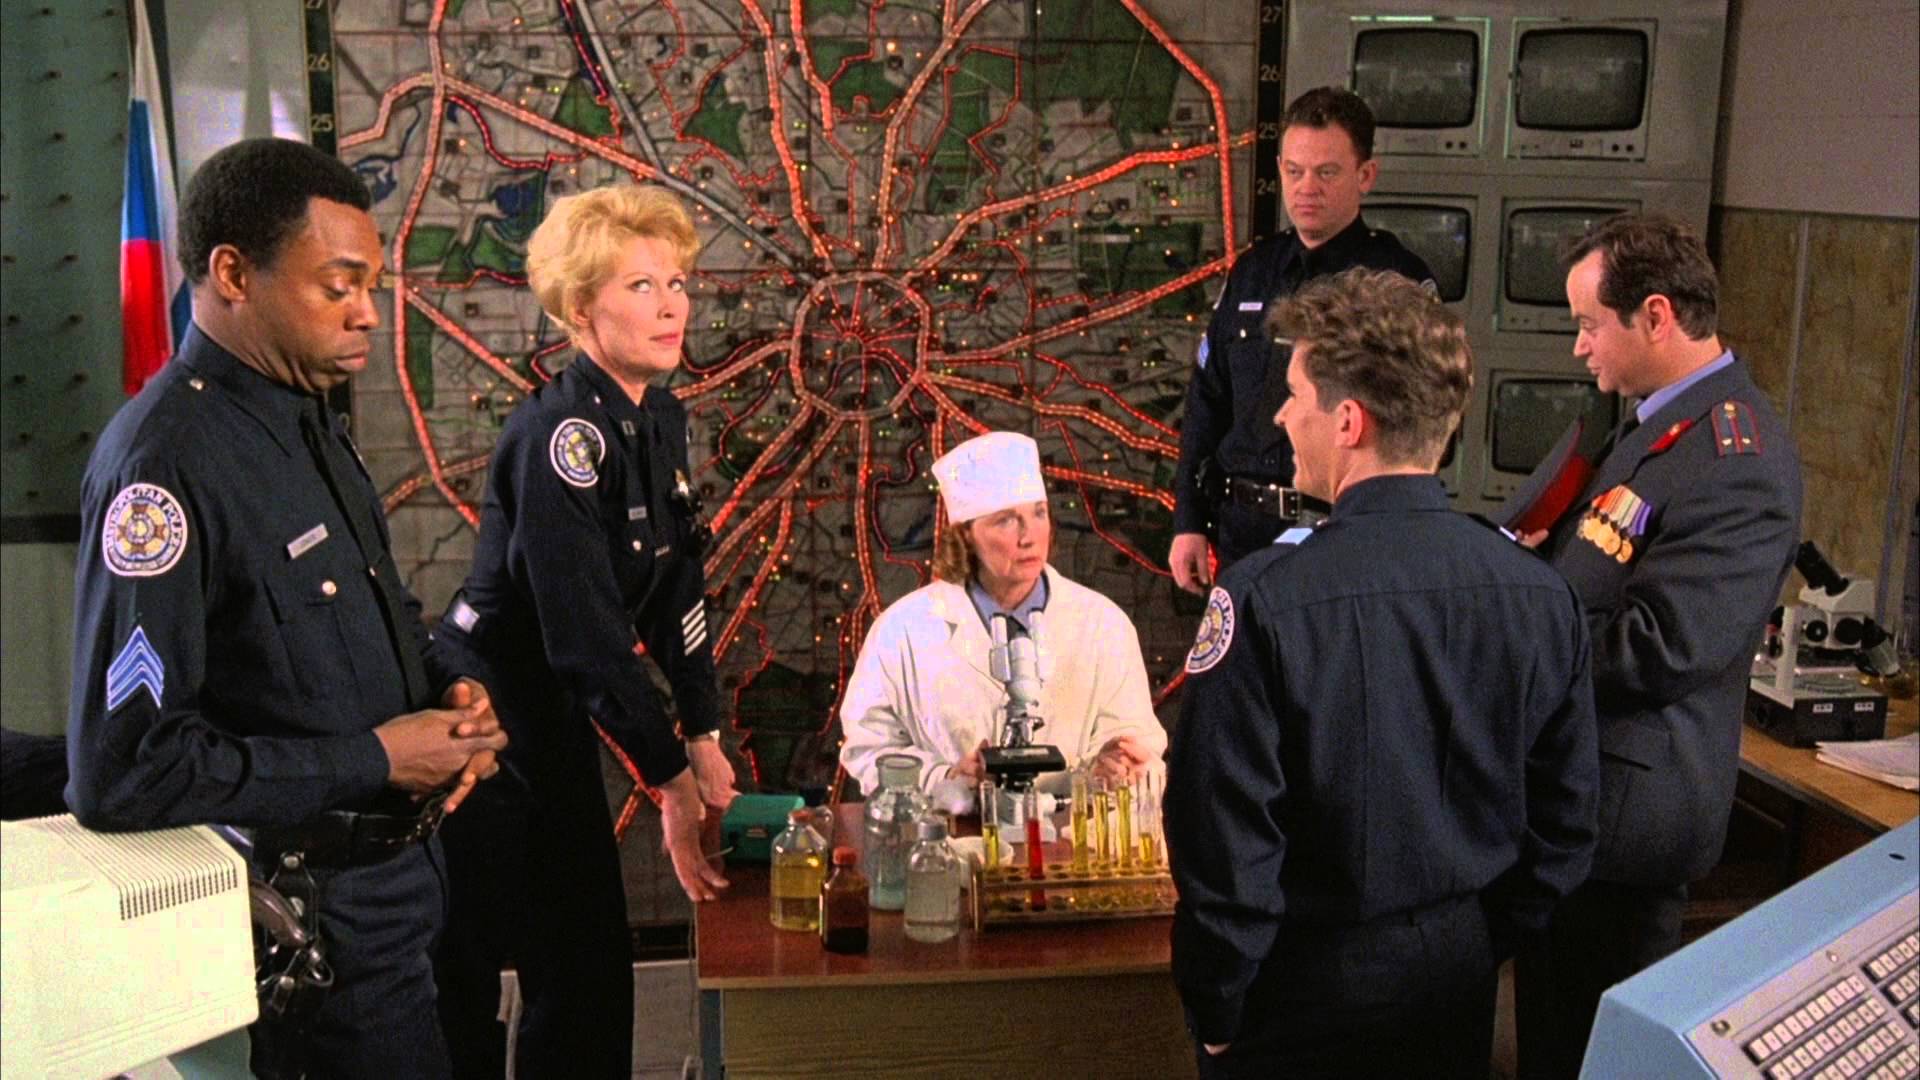 The “Police Academy” Franchise: 7.”Police Academy: Mission to Moscow” & Franchise Wrap-Up